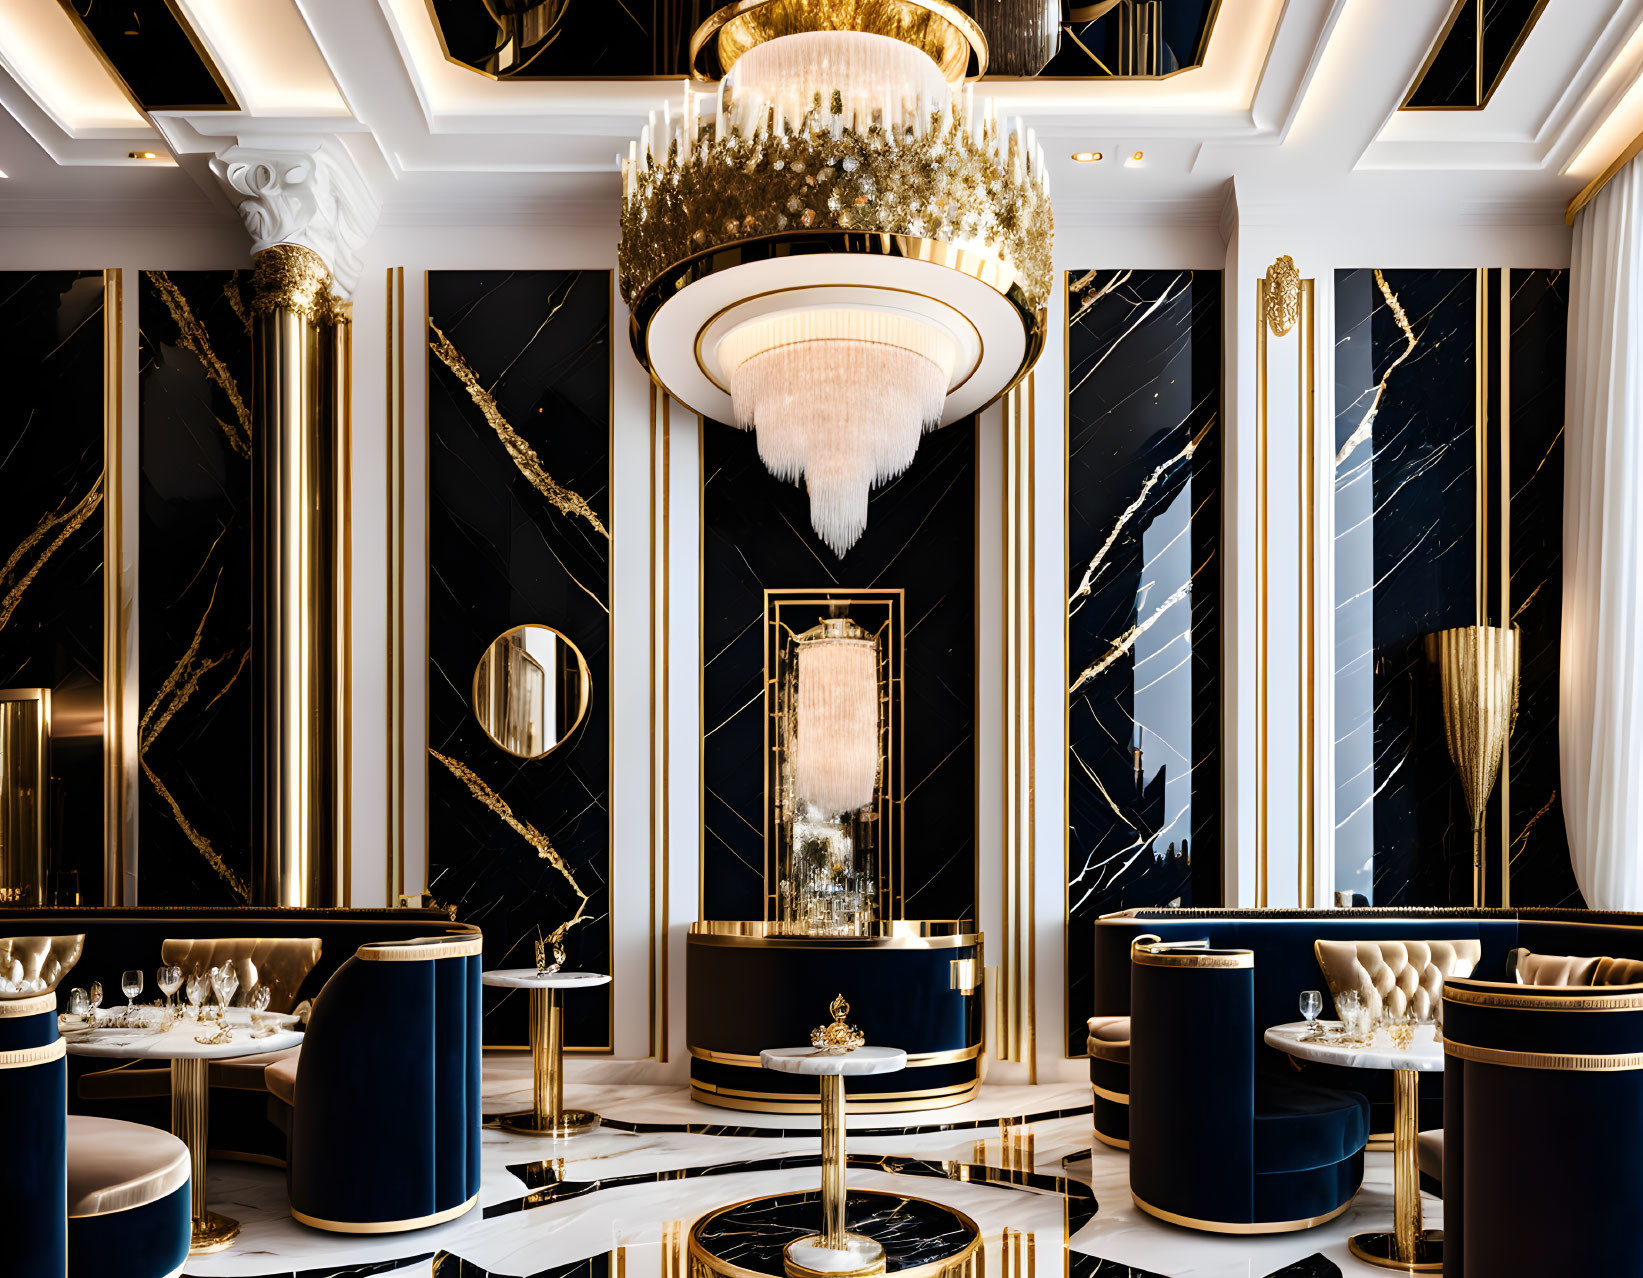 Luxurious Dining Area with Black Marble Walls and Gold Accents